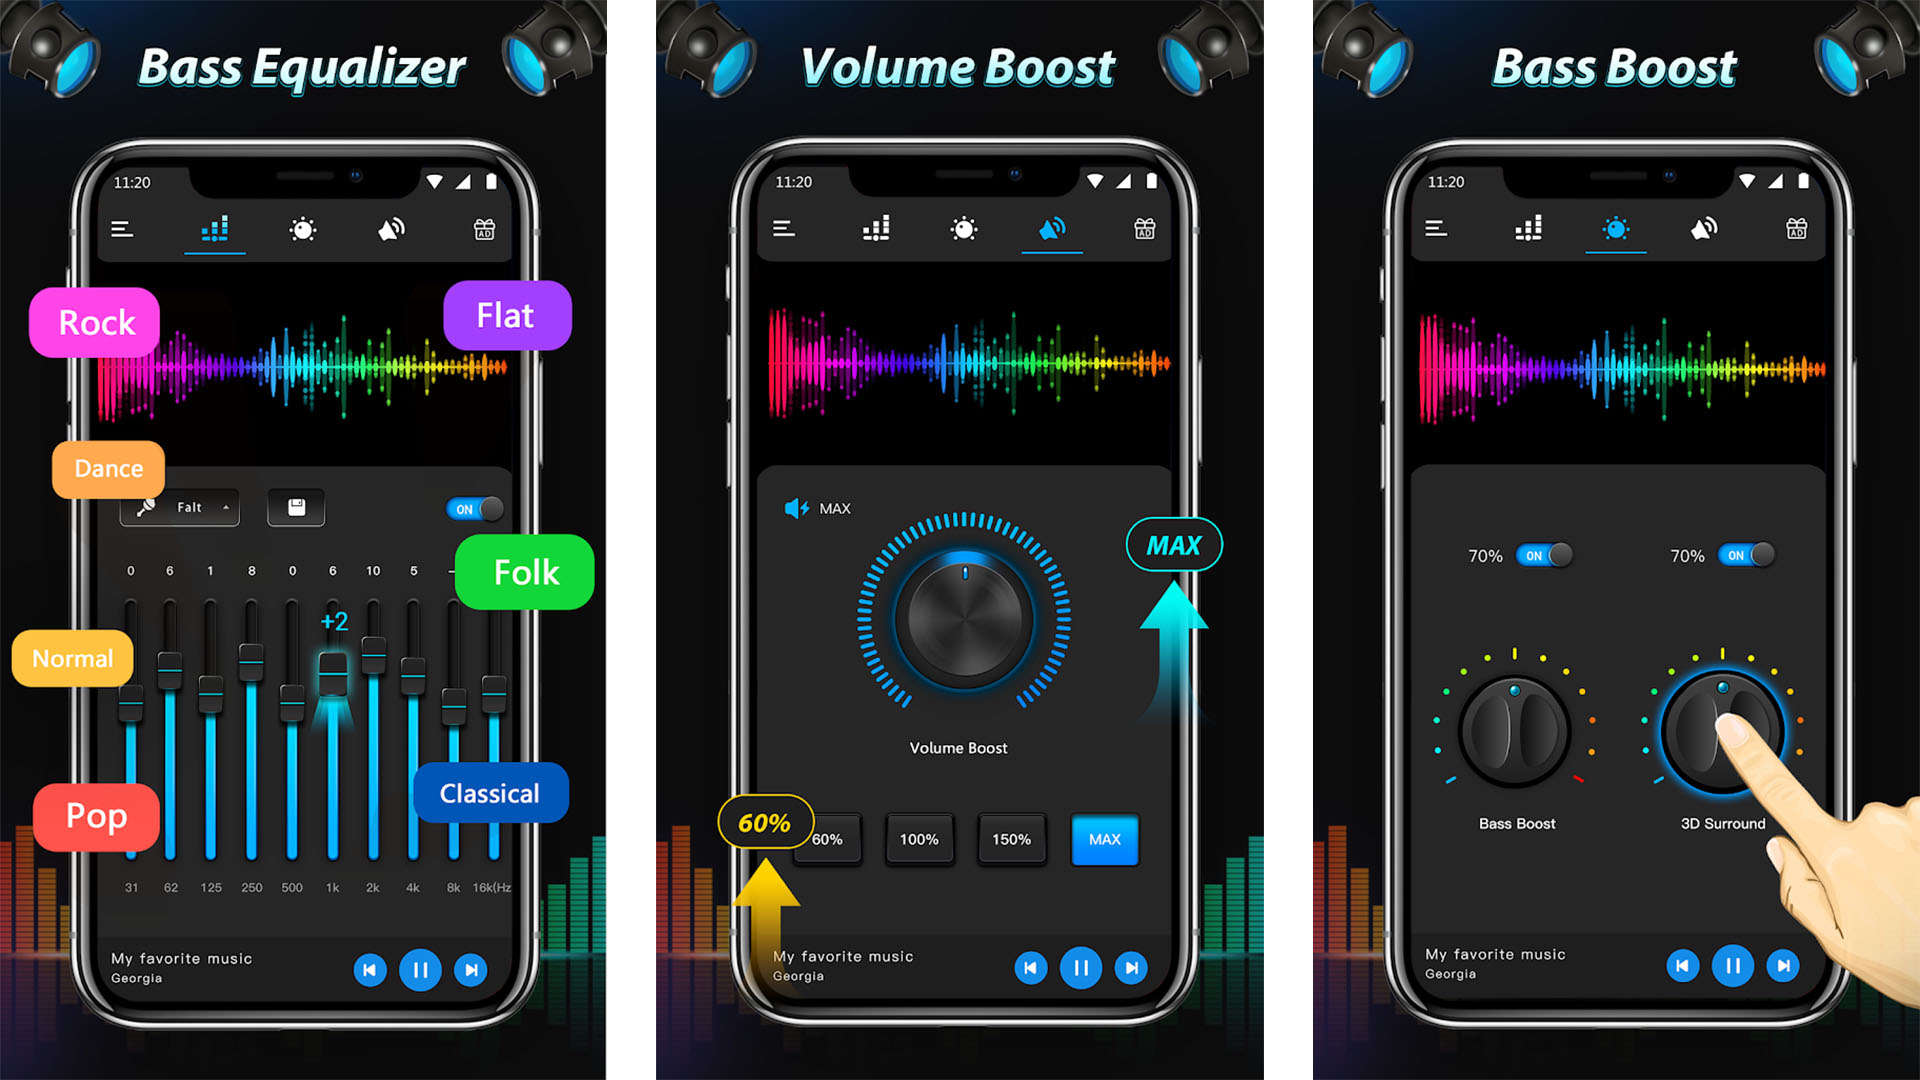 10 best equalizer apps for Android LaptrinhX / News